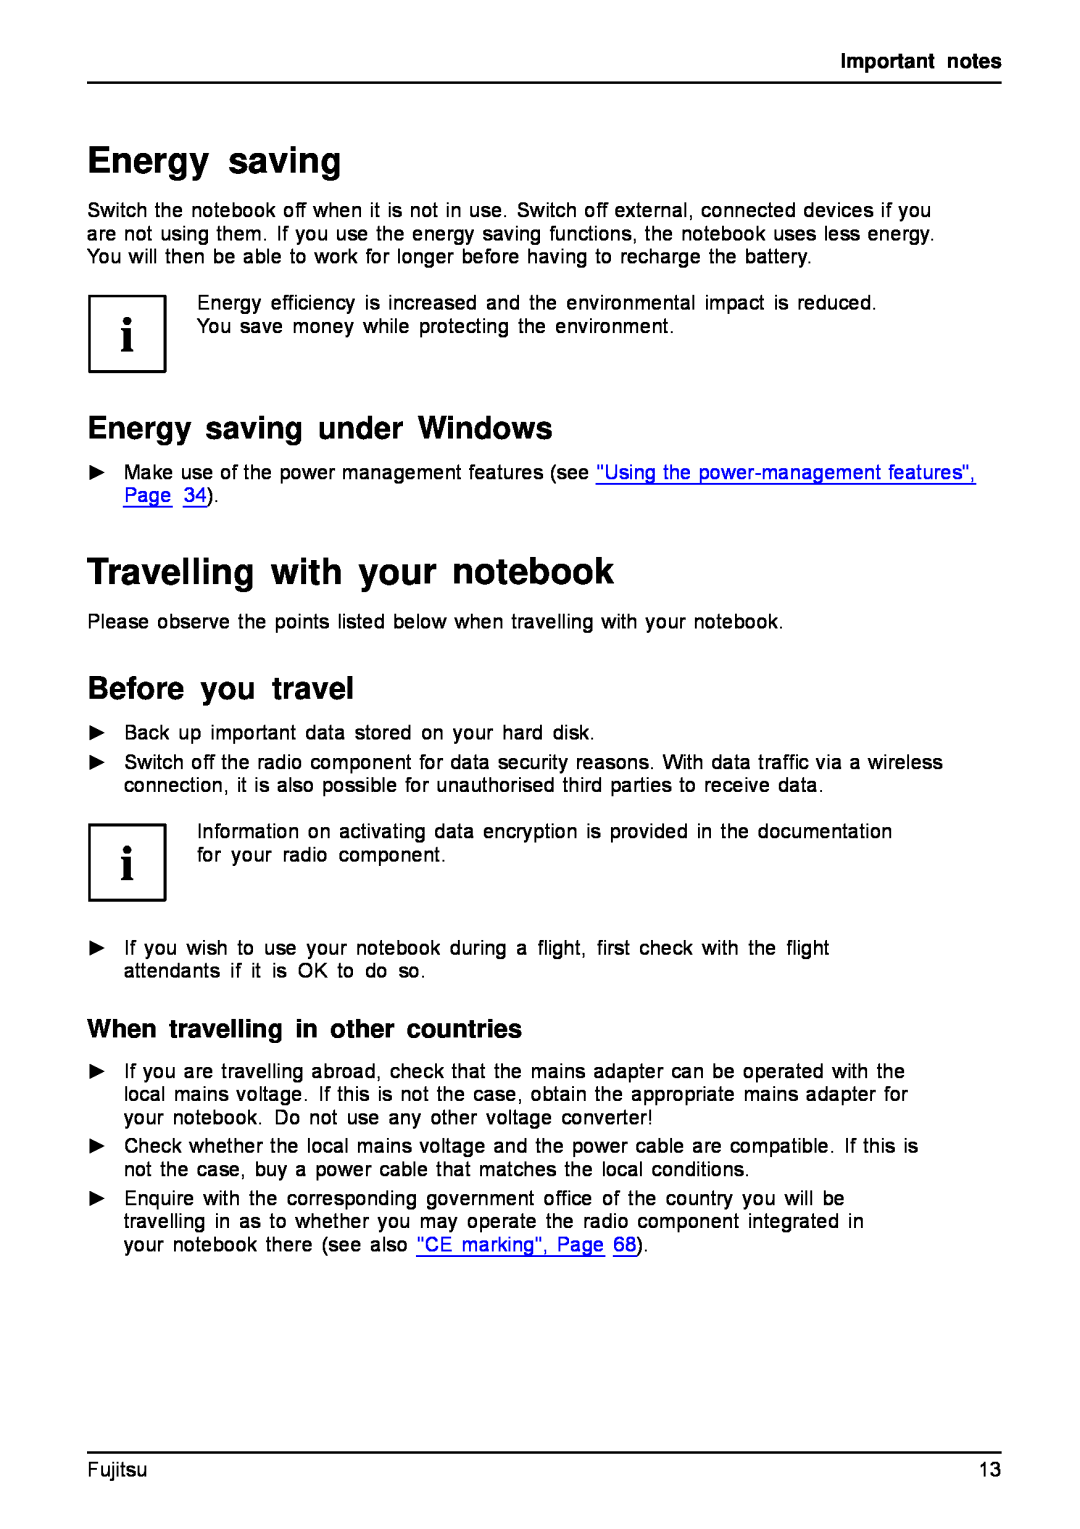 Fujitsu A512, AH512 Travelling with your notebook, Energy saving under Windows, Before you travel, Important notes 